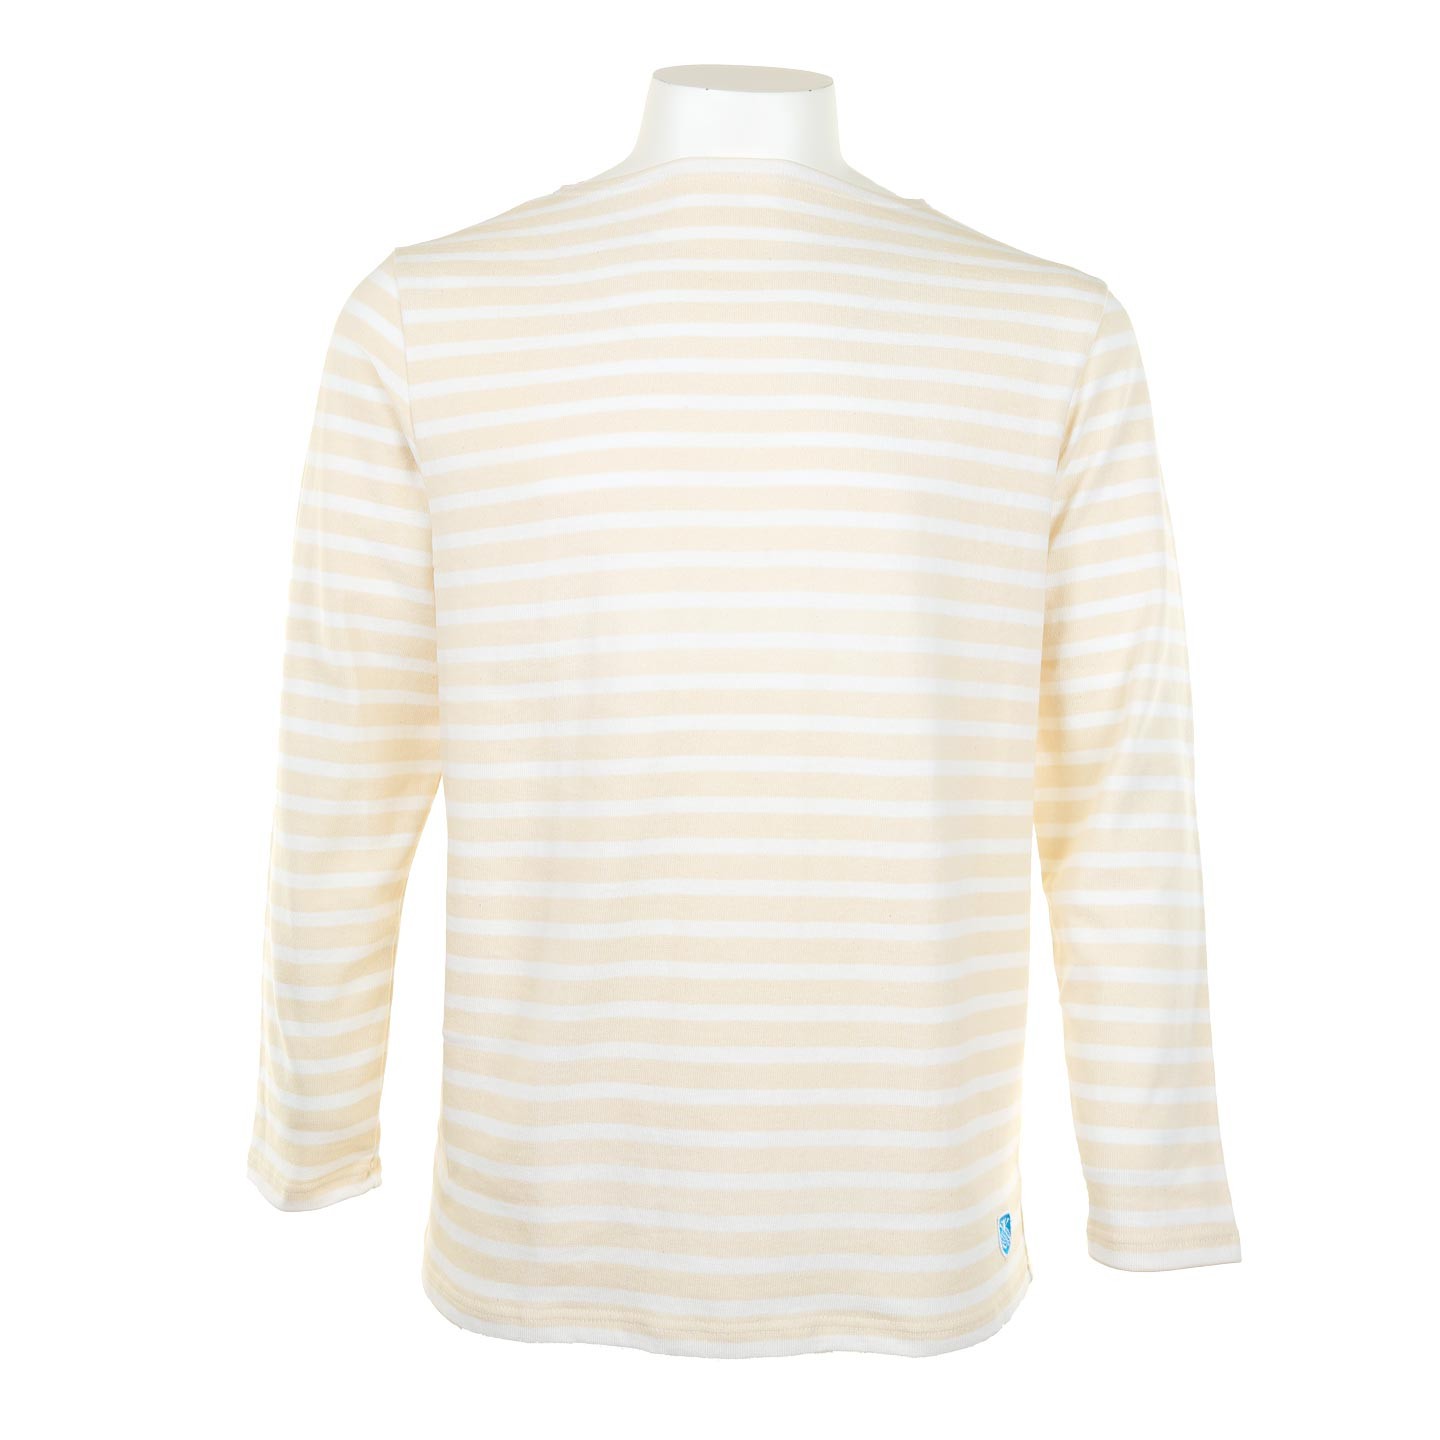 Striped shirt Ecru / White, unisex made in France Orcival